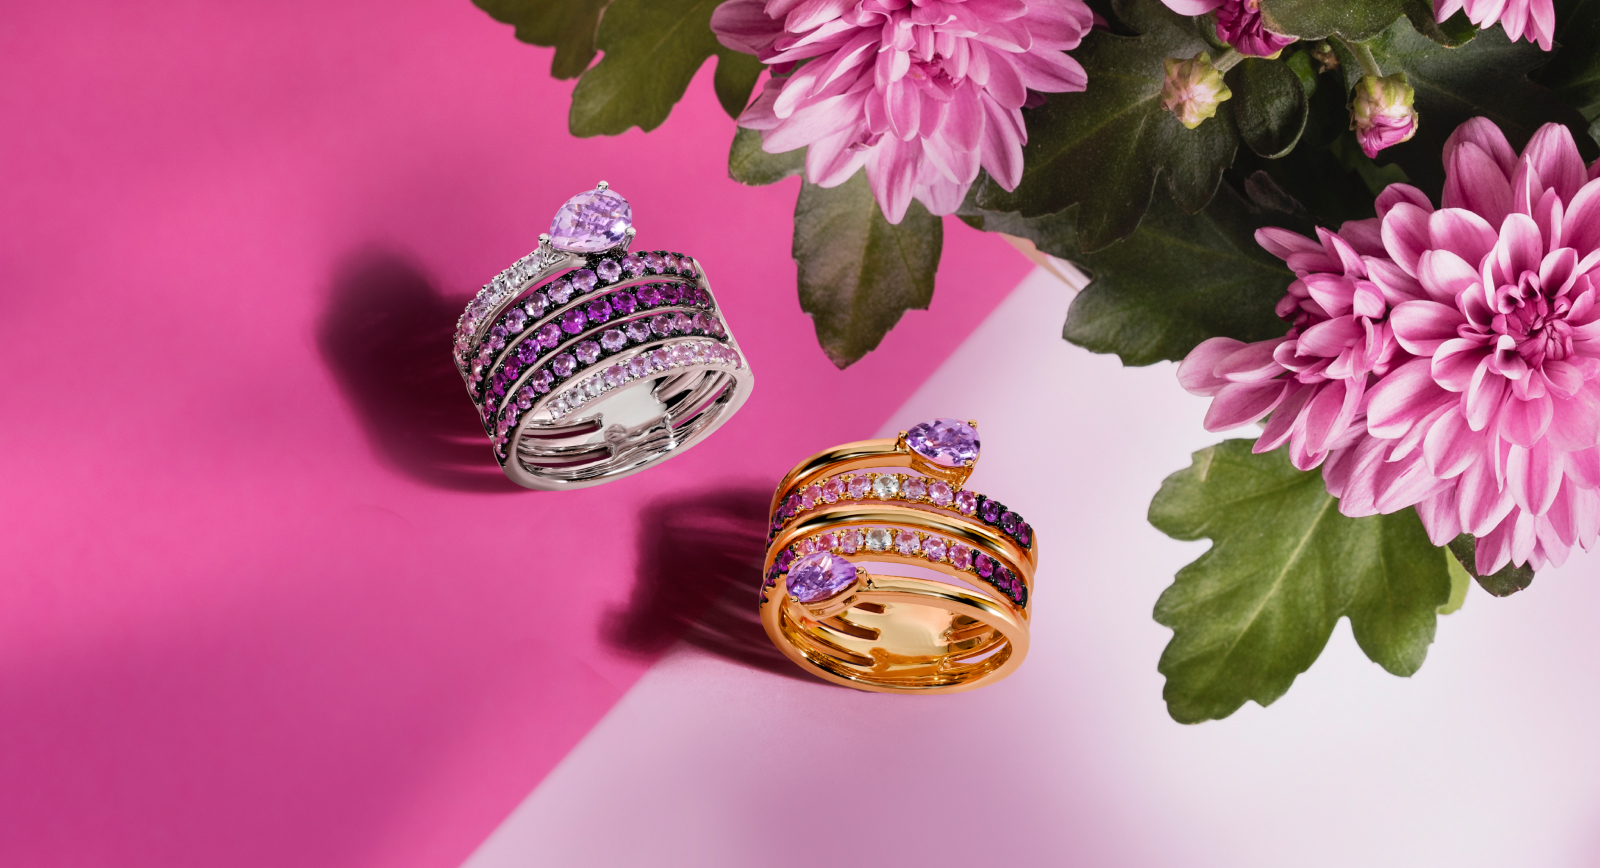 Le Vian Ombrè® ring (top) with Cotton Candy Amethyst and Strawberry Ombrè® Sapphires, set in 14K Vanilla Gold®, and the Le Vian Ombrè® ring with Cotton Candy Amethyst®, Strawberry Ombrè® Sapphires, and Vanilla Sapphire™,  set in 14K Strawberry Gold®